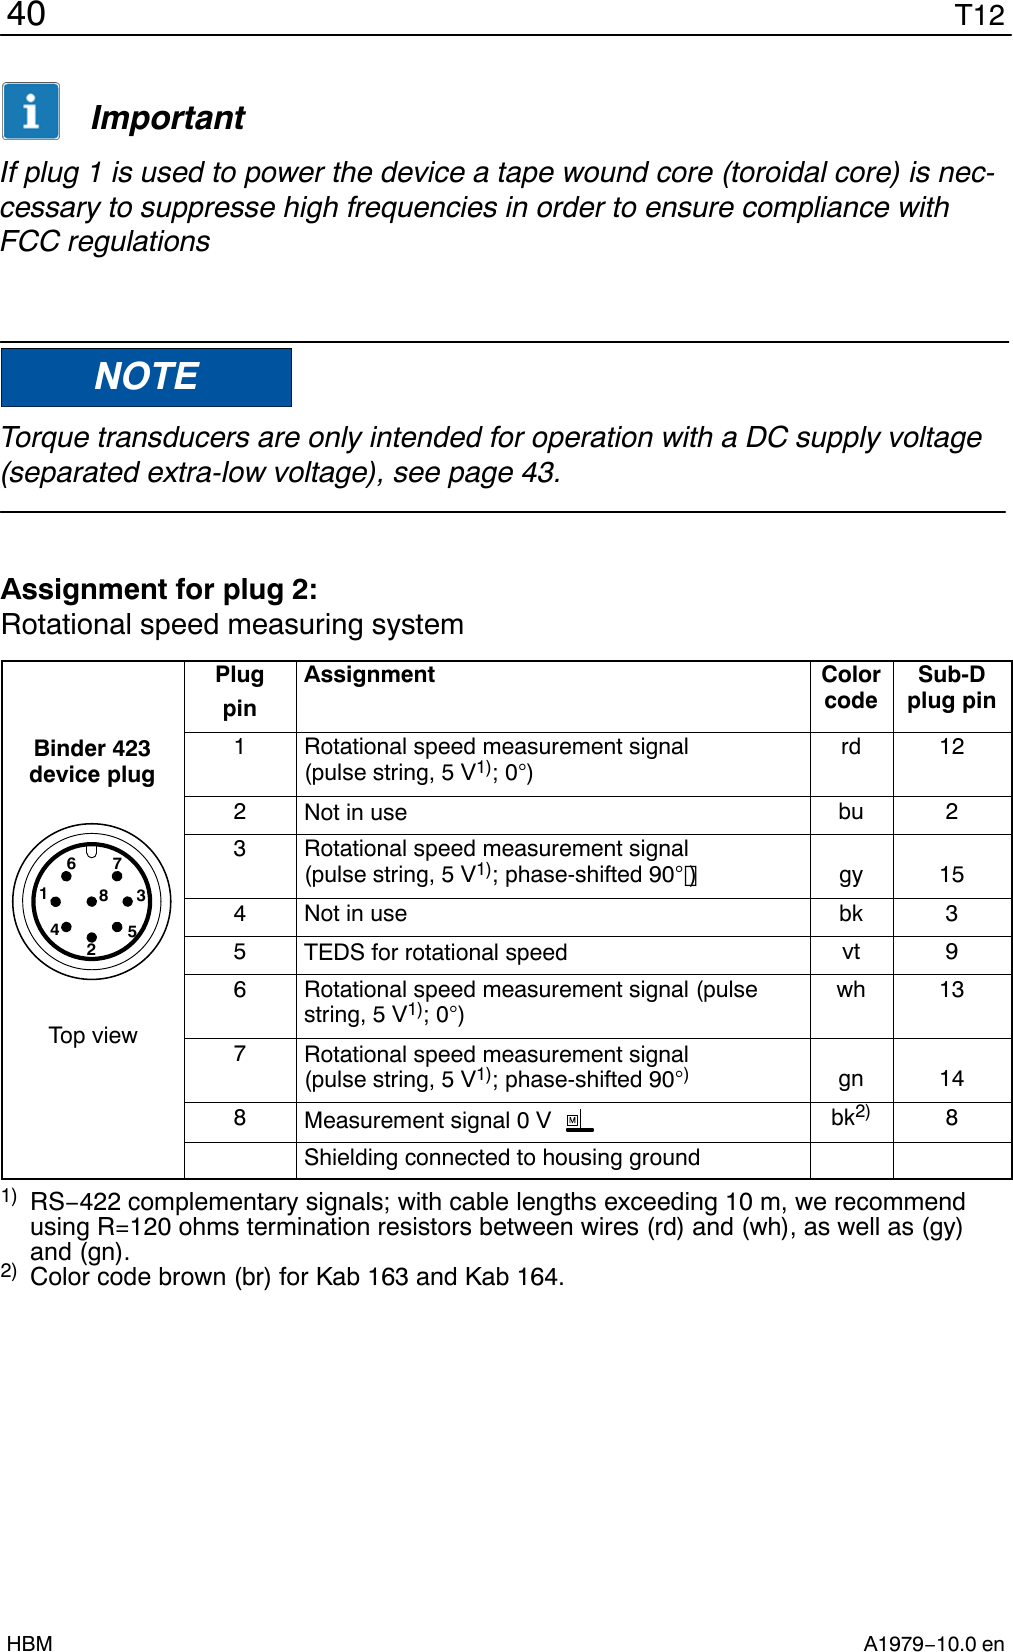 T1240A1979−10.0 enHBMImportantIf plug 1 is used to power the device a tape wound core (toroidal core) is nec-cessary to suppresse high frequencies in order to ensure compliance withFCC regulationsNOTETorque transducers are only intended for operation with a DC supply voltage(separated extra-low voltage), see page 43.Assignment for plug 2:Rotational speed measuring systemBinder 423device plugTop view73462518PlugpinAssignment ColorcodeSub-Dplug pin1Rotational speed measurement signal (pulse string, 5 V1); 0)rd 122Not in use bu 23Rotational speed measurement signal (pulse string, 5 V1); phase-shifted 90) gy 154Not in use bk 35TEDS for rotational speed vt 96Rotational speed measurement signal (pulsestring, 5 V1); 0)wh 137Rotational speed measurement signal (pulse string, 5 V1); phase-shifted 90)gn 148Measurement signal 0 V bk2) 8Shielding connected to housing ground1) RS−422 complementary signals; with cable lengths exceeding 10 m, we recommendusing R=120 ohms termination resistors between wires (rd) and (wh), as well as (gy)and (gn).2) Color code brown (br) for Kab 163 and Kab 164.